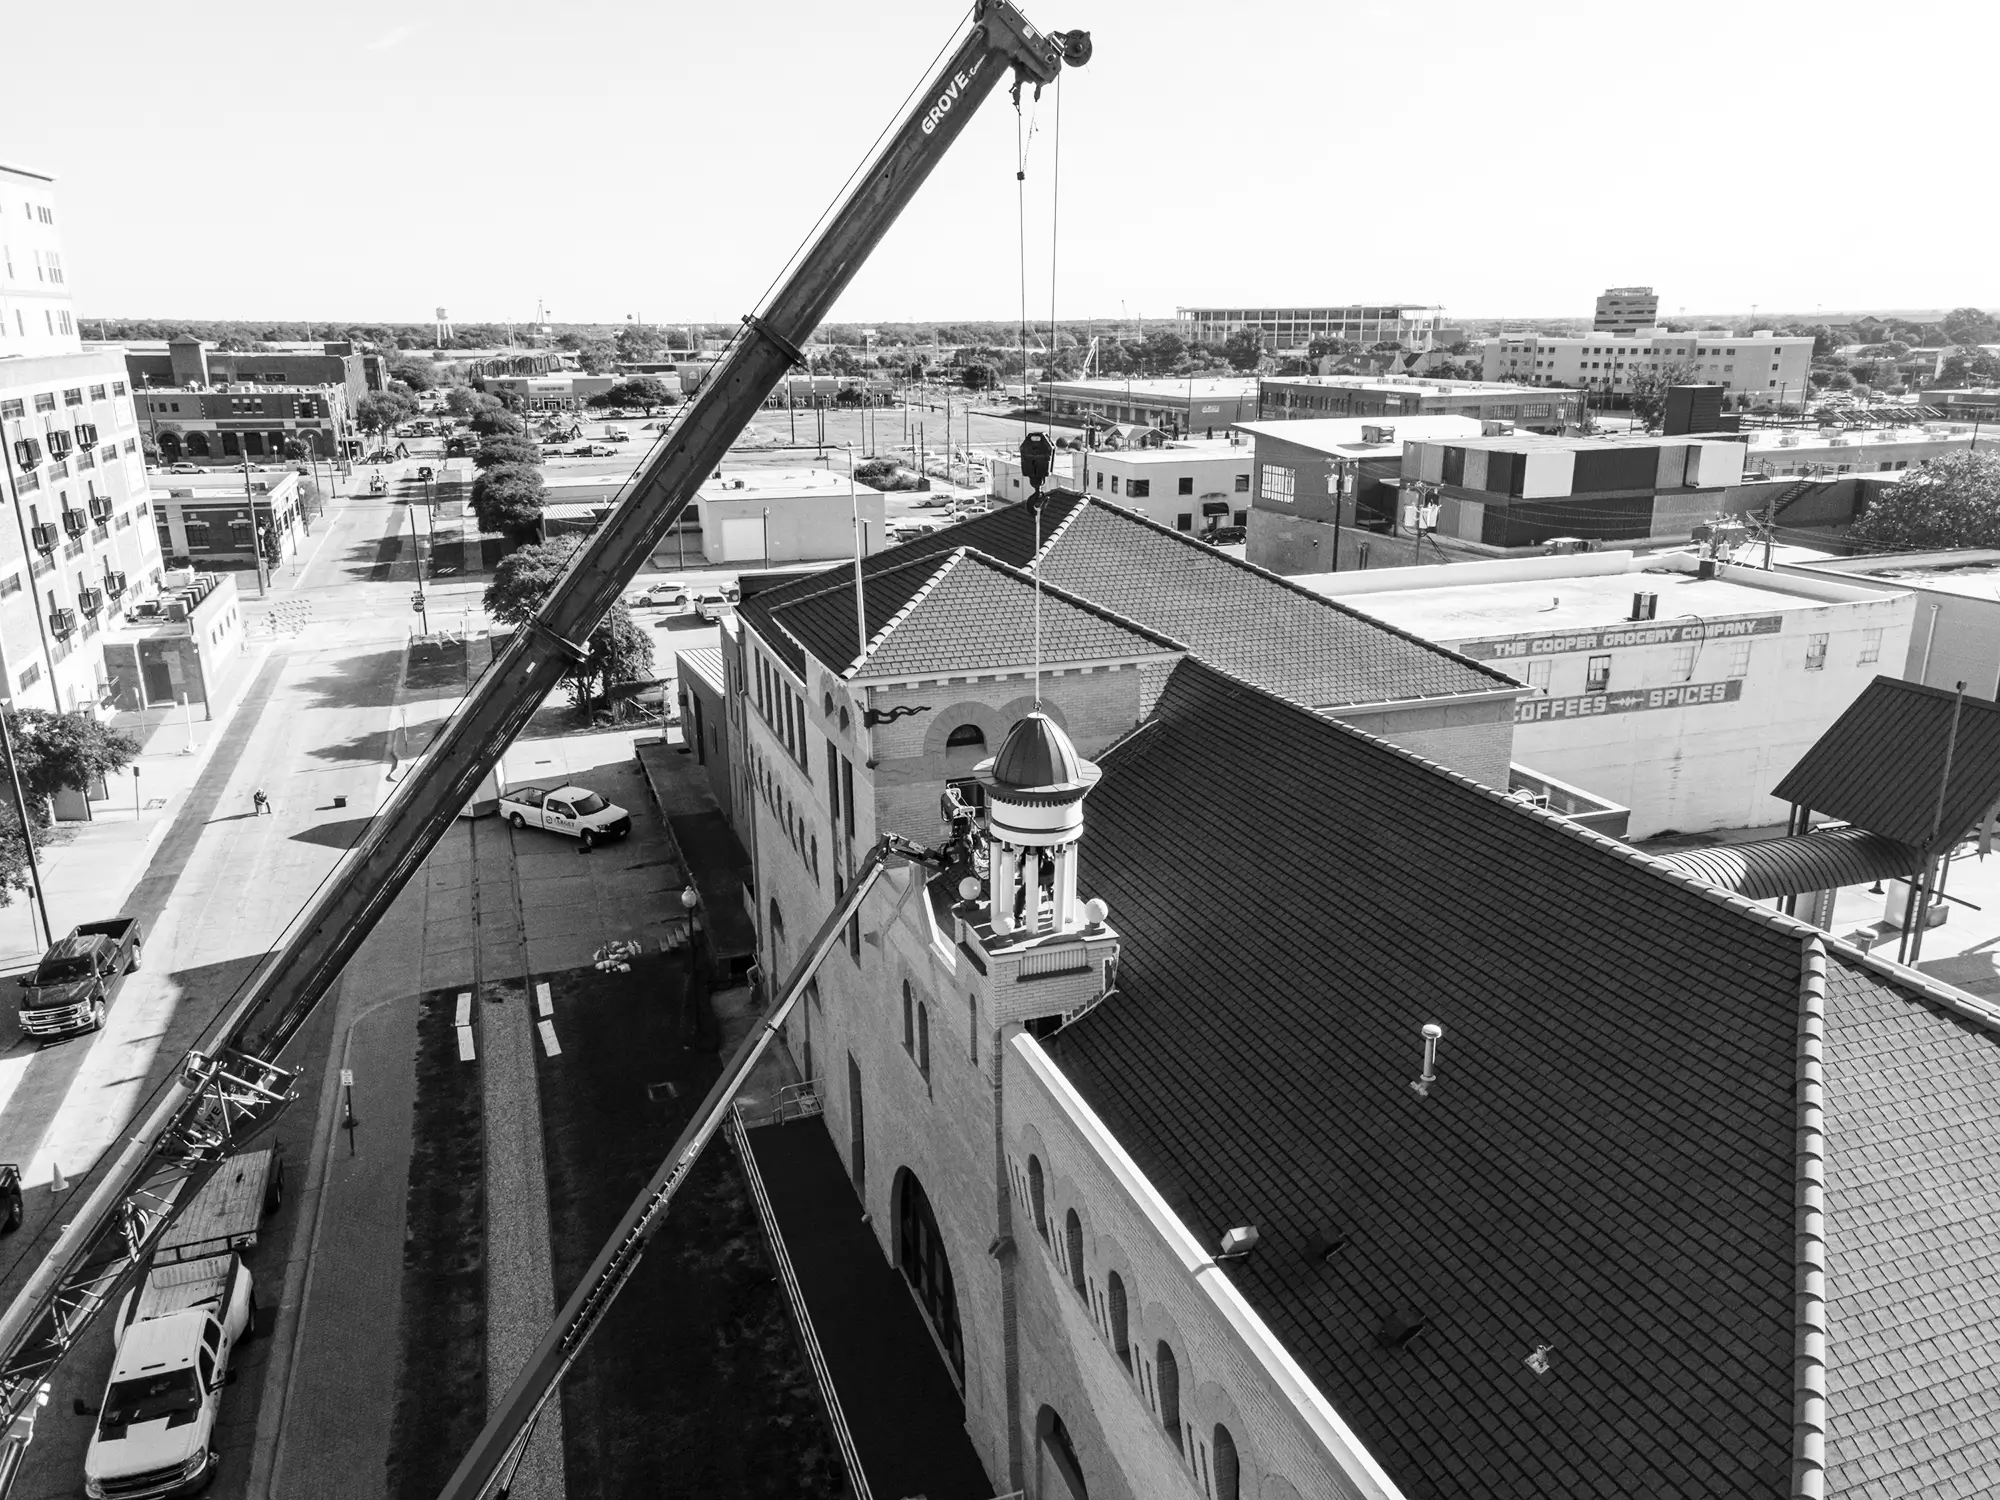 A crane placing an object on a building roof